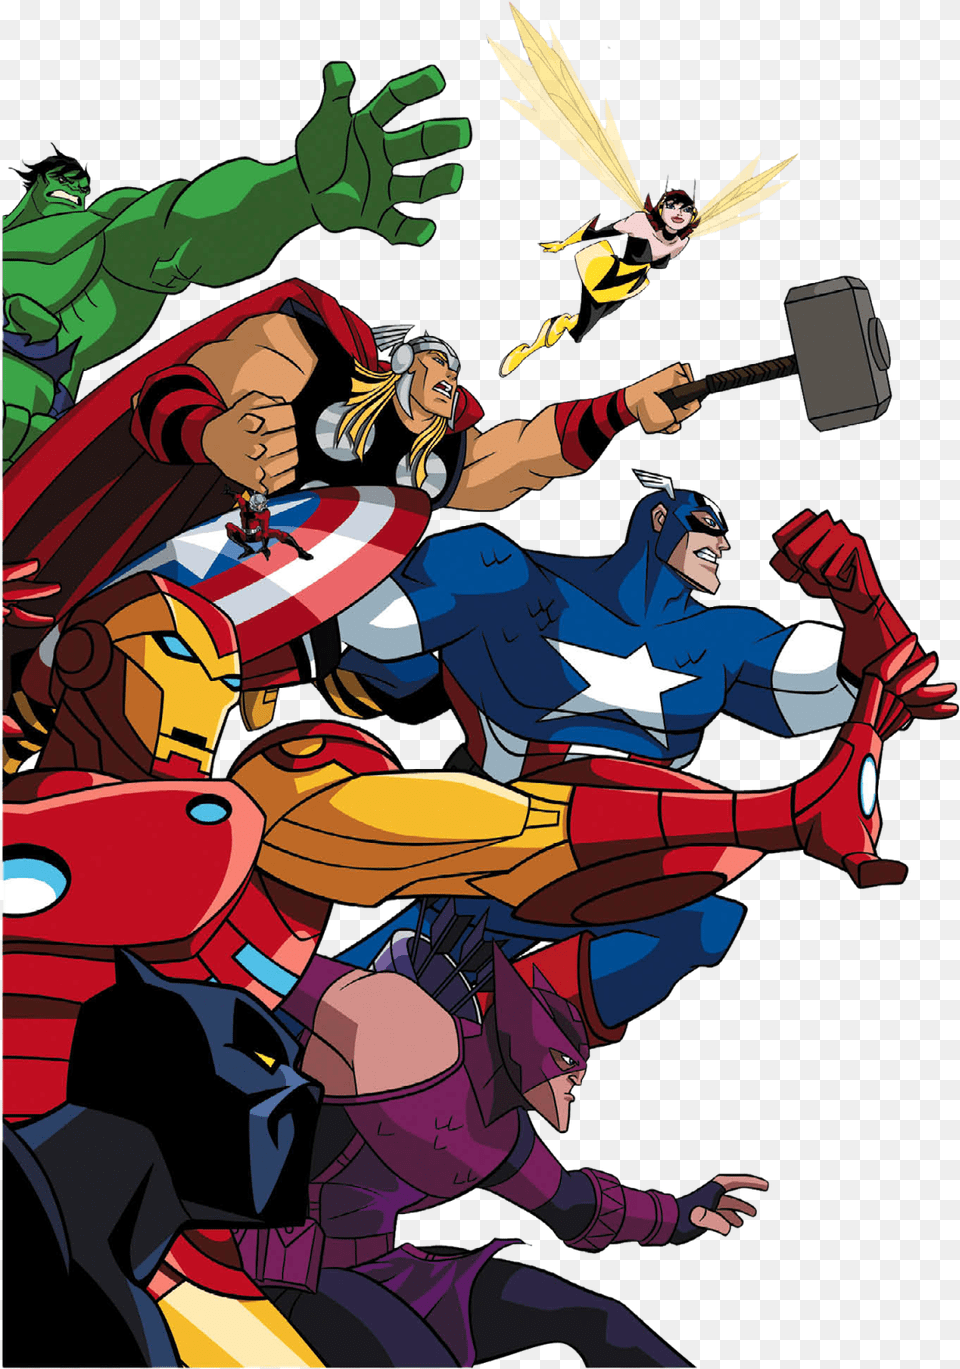 My Heroe Comic Best Comics Fun Comics Avengers 1 Marvel Universe Avengers Earth39s Mightiest Heroes, Book, Publication, Person, Baby Free Png Download